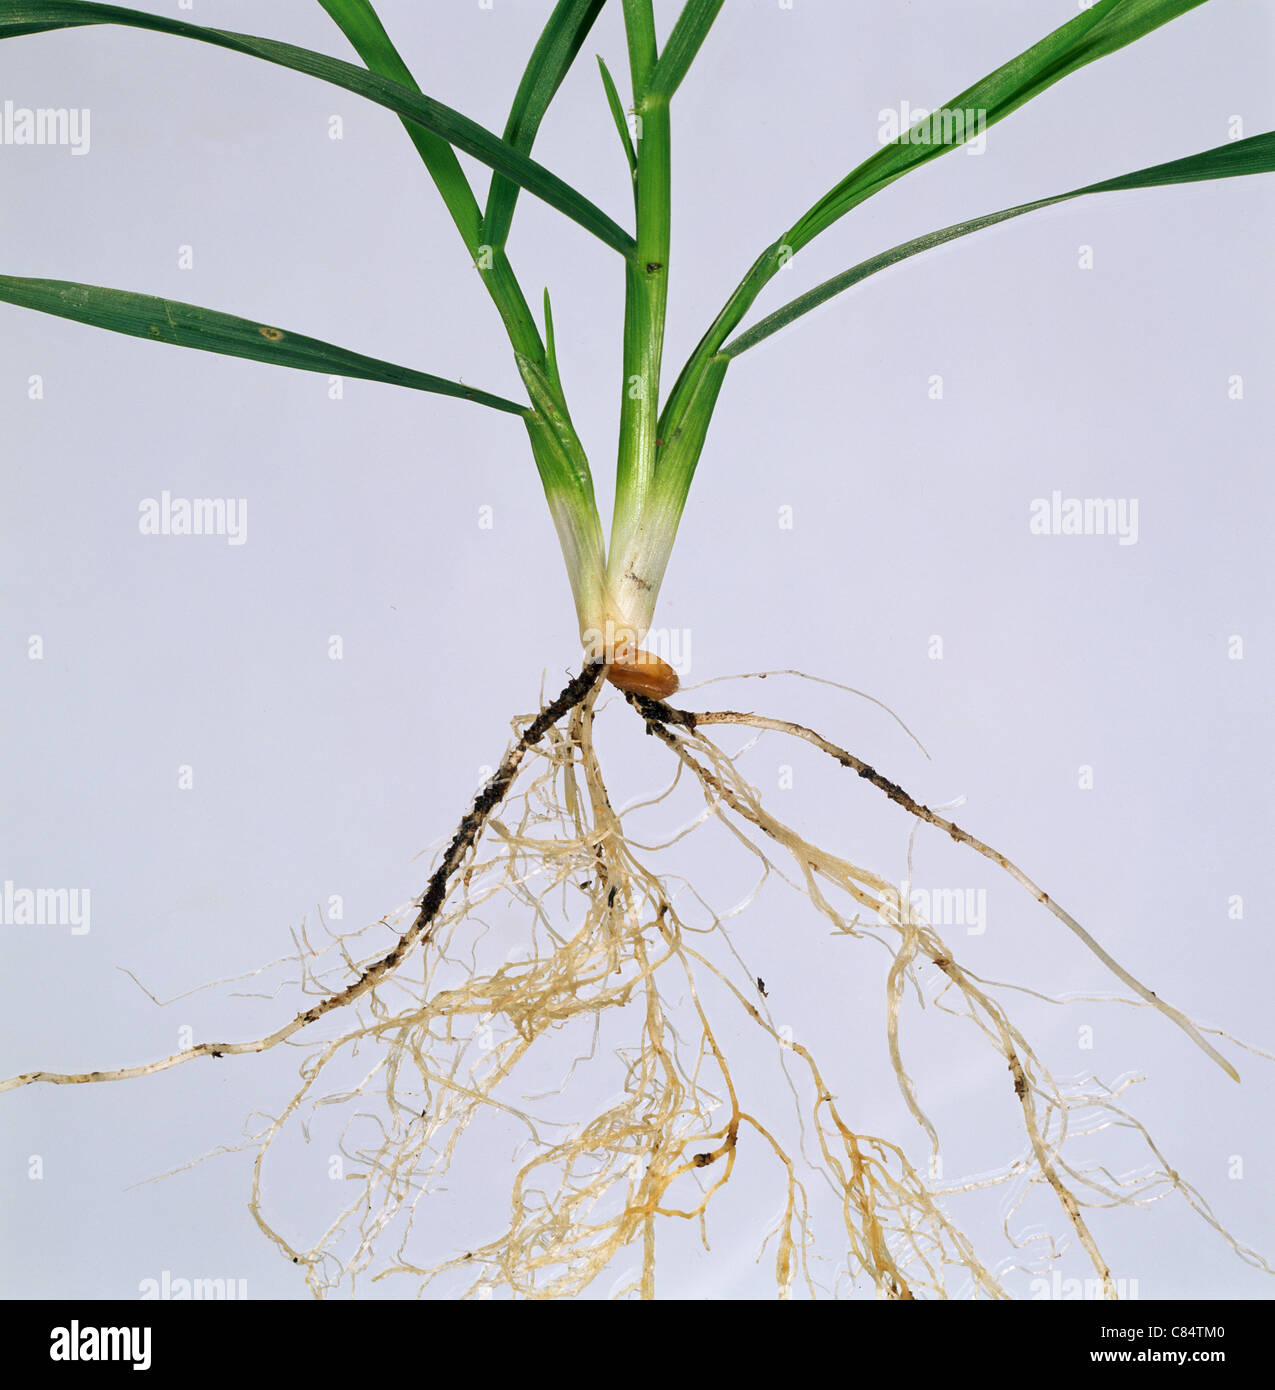 Wheat seedling, at stage 22 showing roots and leaves against a white studio background Stock Photo